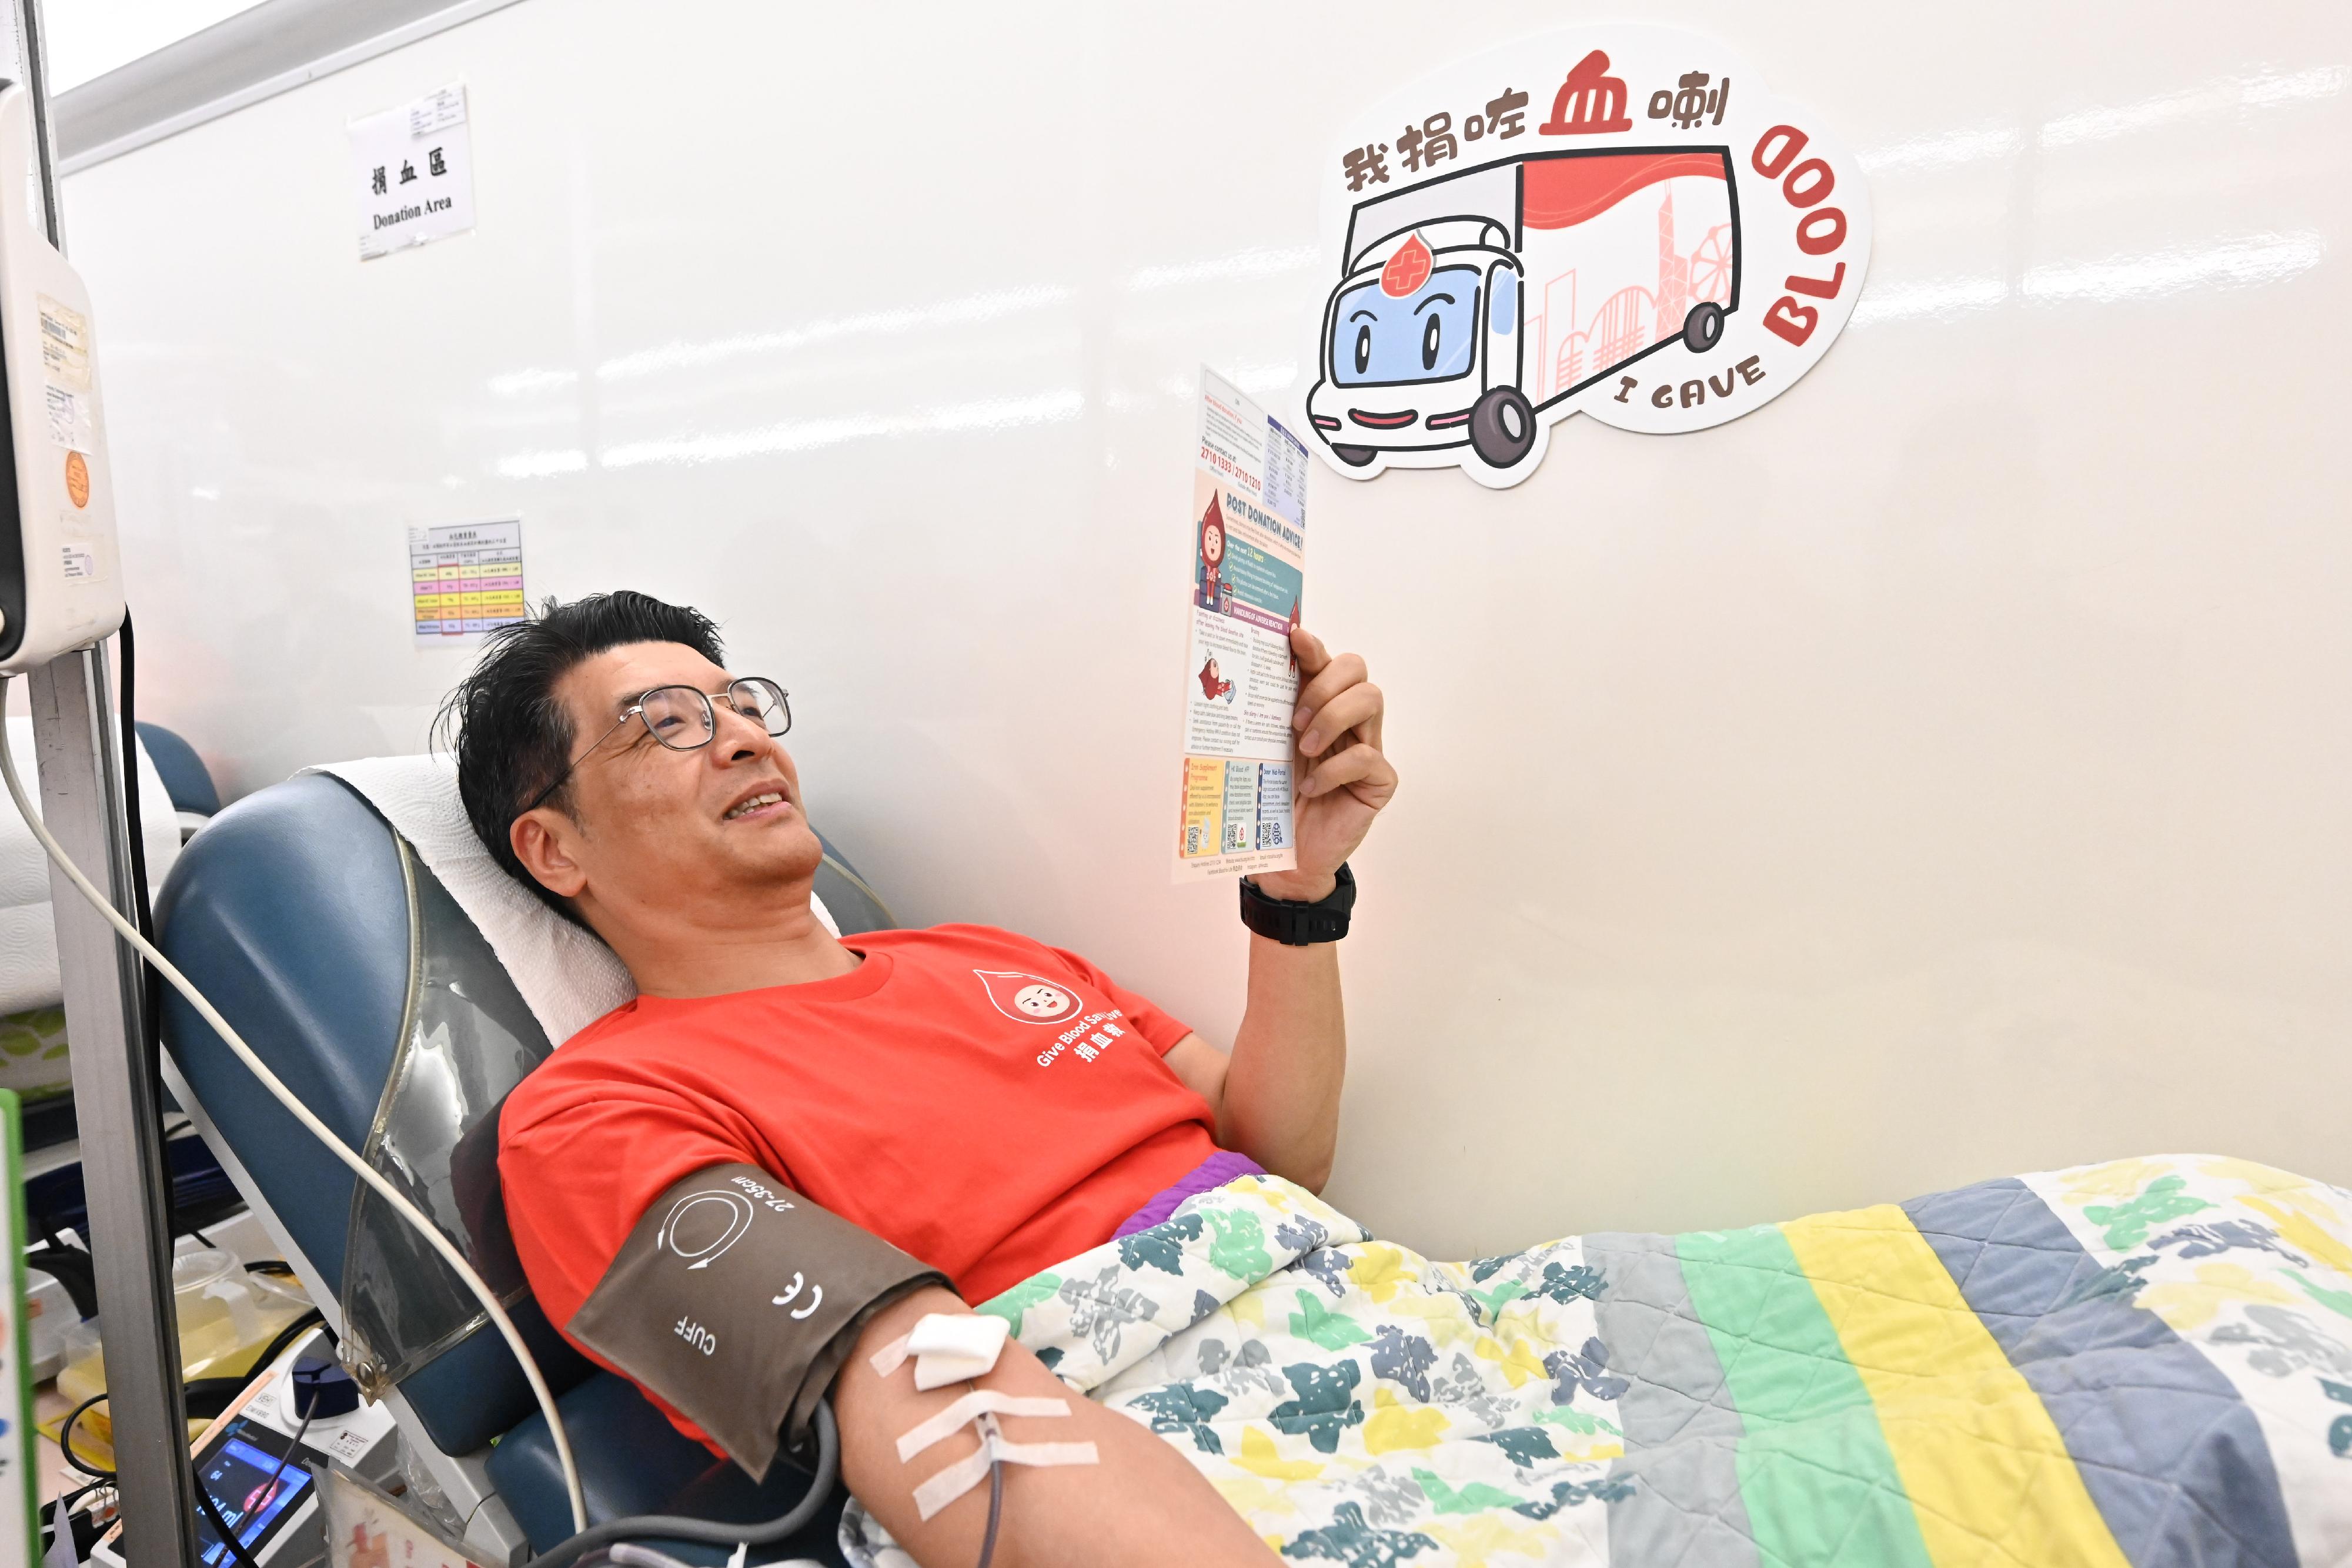 The Commissioner for Primary Healthcare of the Health Bureau, Dr Pang Fei-chau, donates blood on the mobile blood donation vehicle of the Hong Kong Red Cross Blood Transfusion Service parked at the Central Government Offices today (August 14).